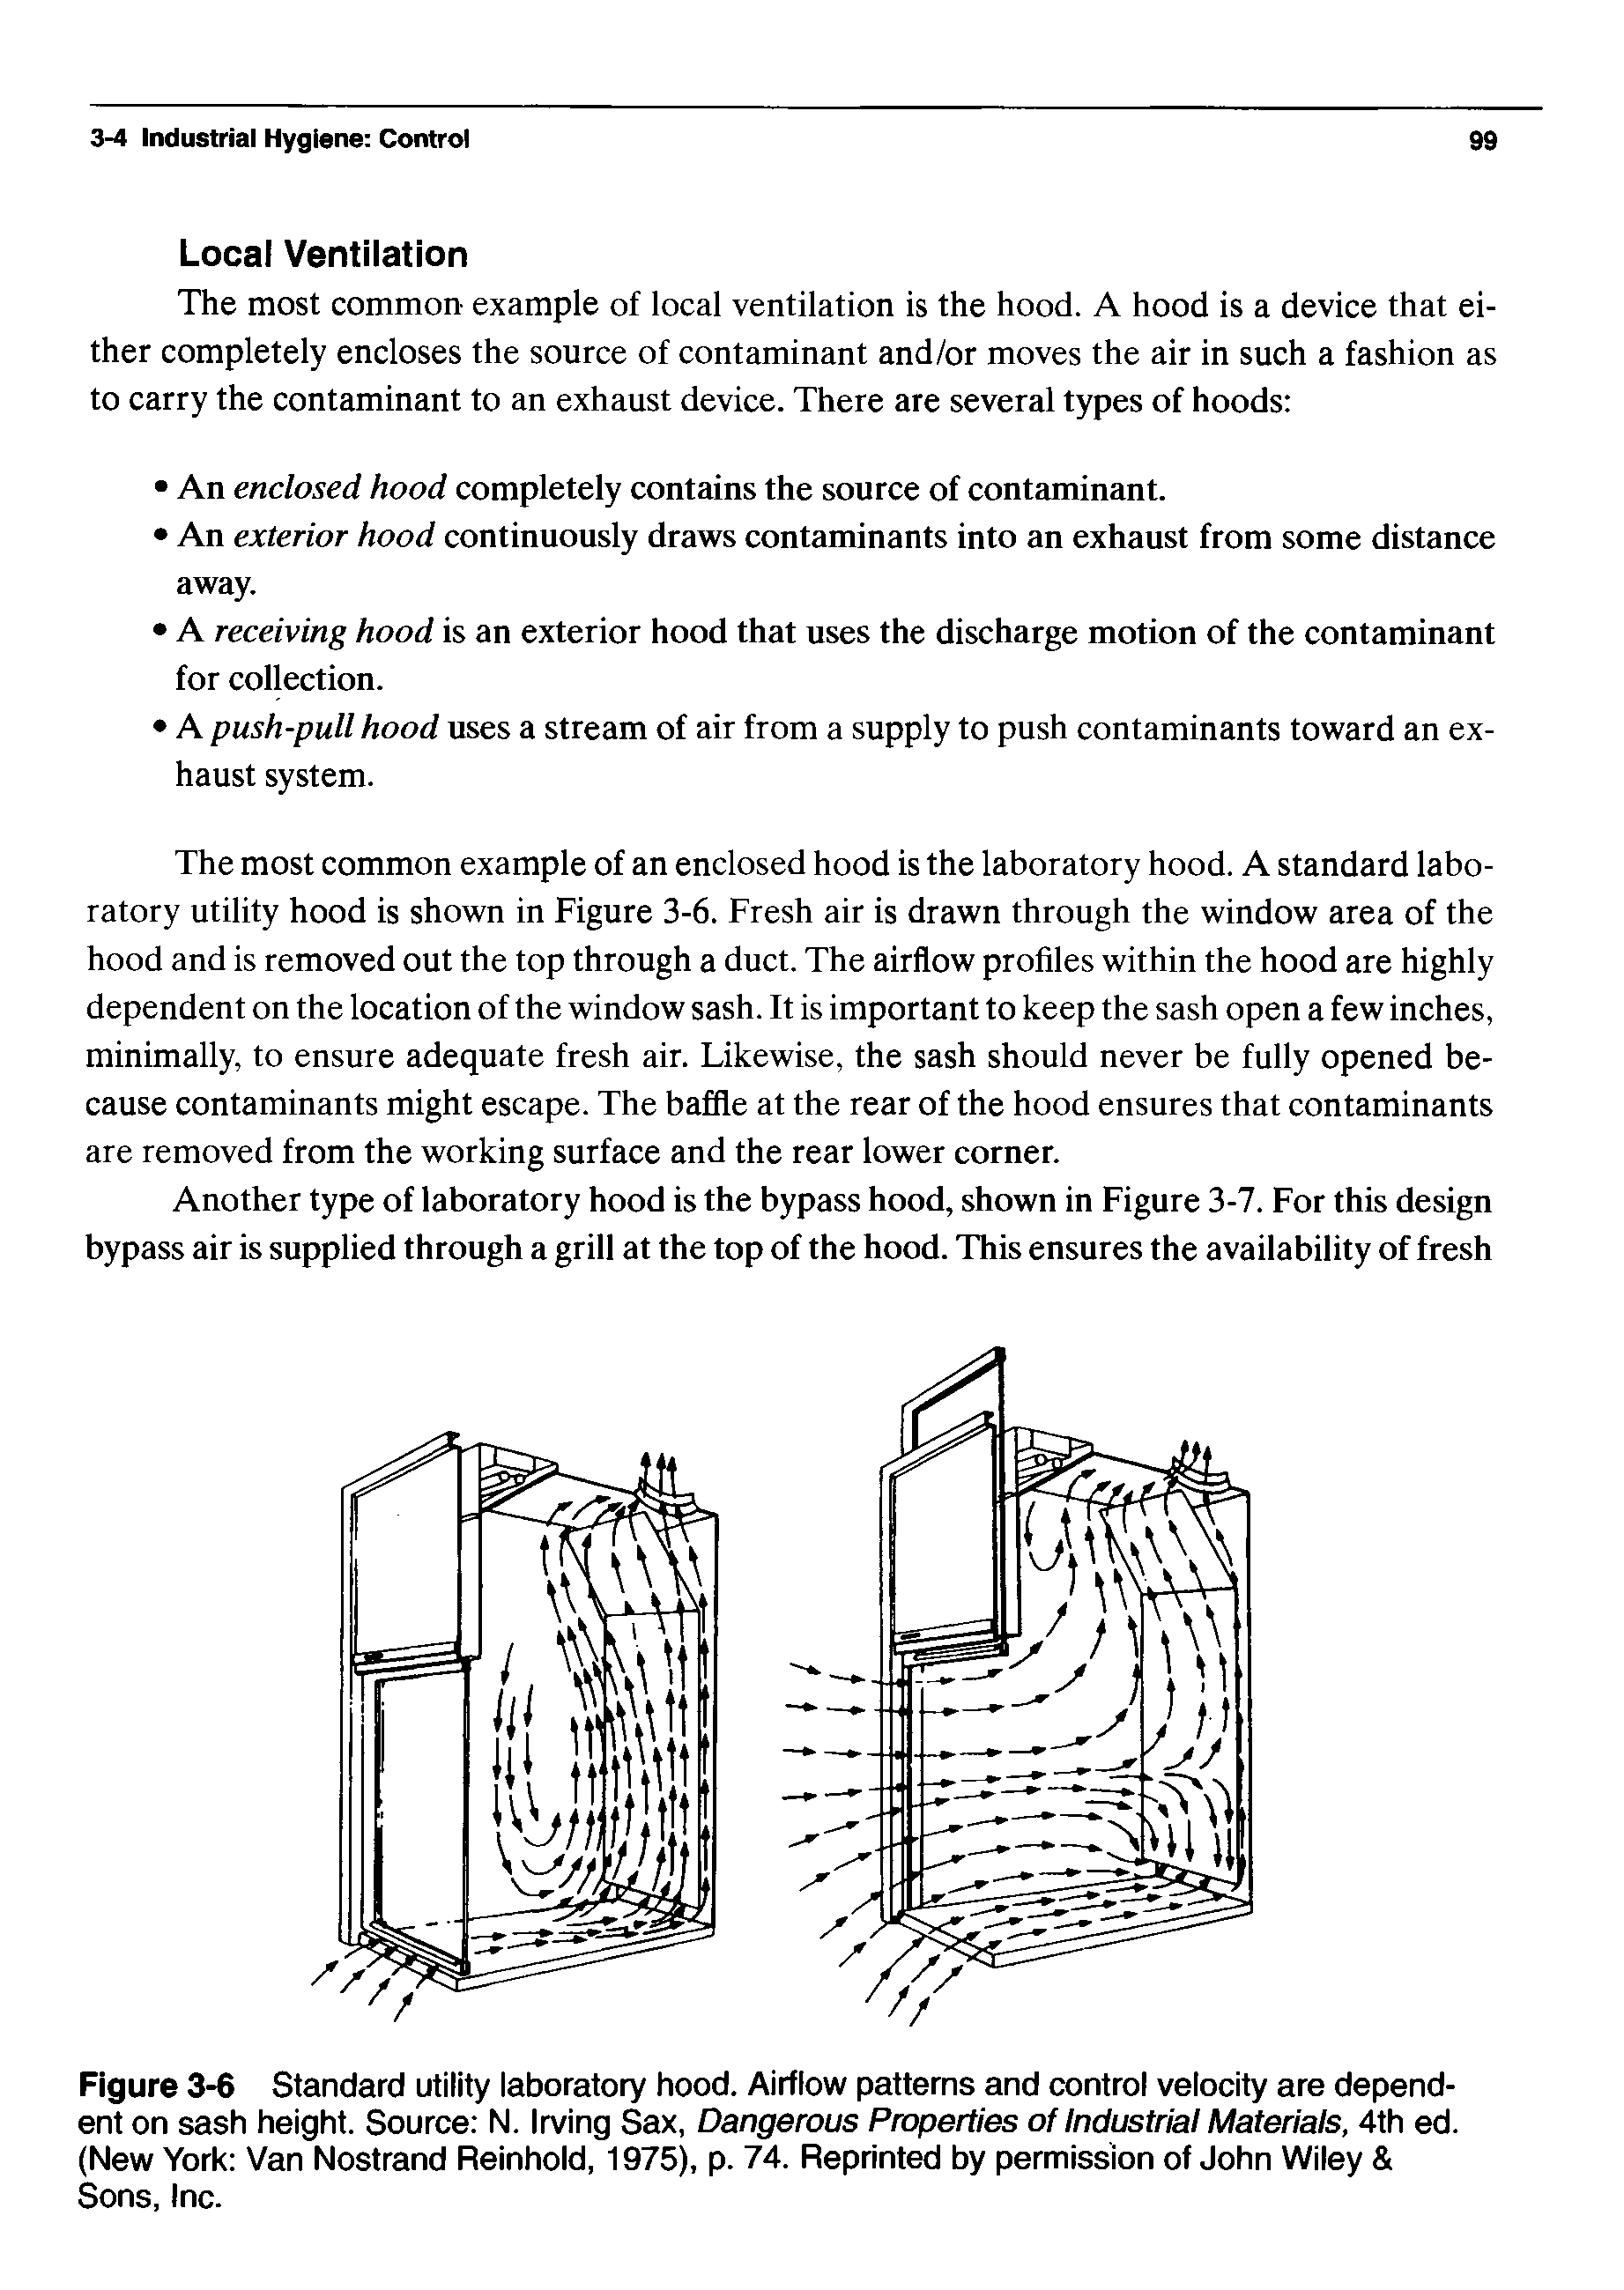 Figure 3-6 Standard utility laboratory hood. Airflow patterns and control velocity are dependent on sash height. Source N. Irving Sax, Dangerous Properties of Industrial Materials, 4th ed. (New York Van Nostrand Reinhold, 1975), p. 74. Reprinted by permission of John Wiley Sons, Inc.